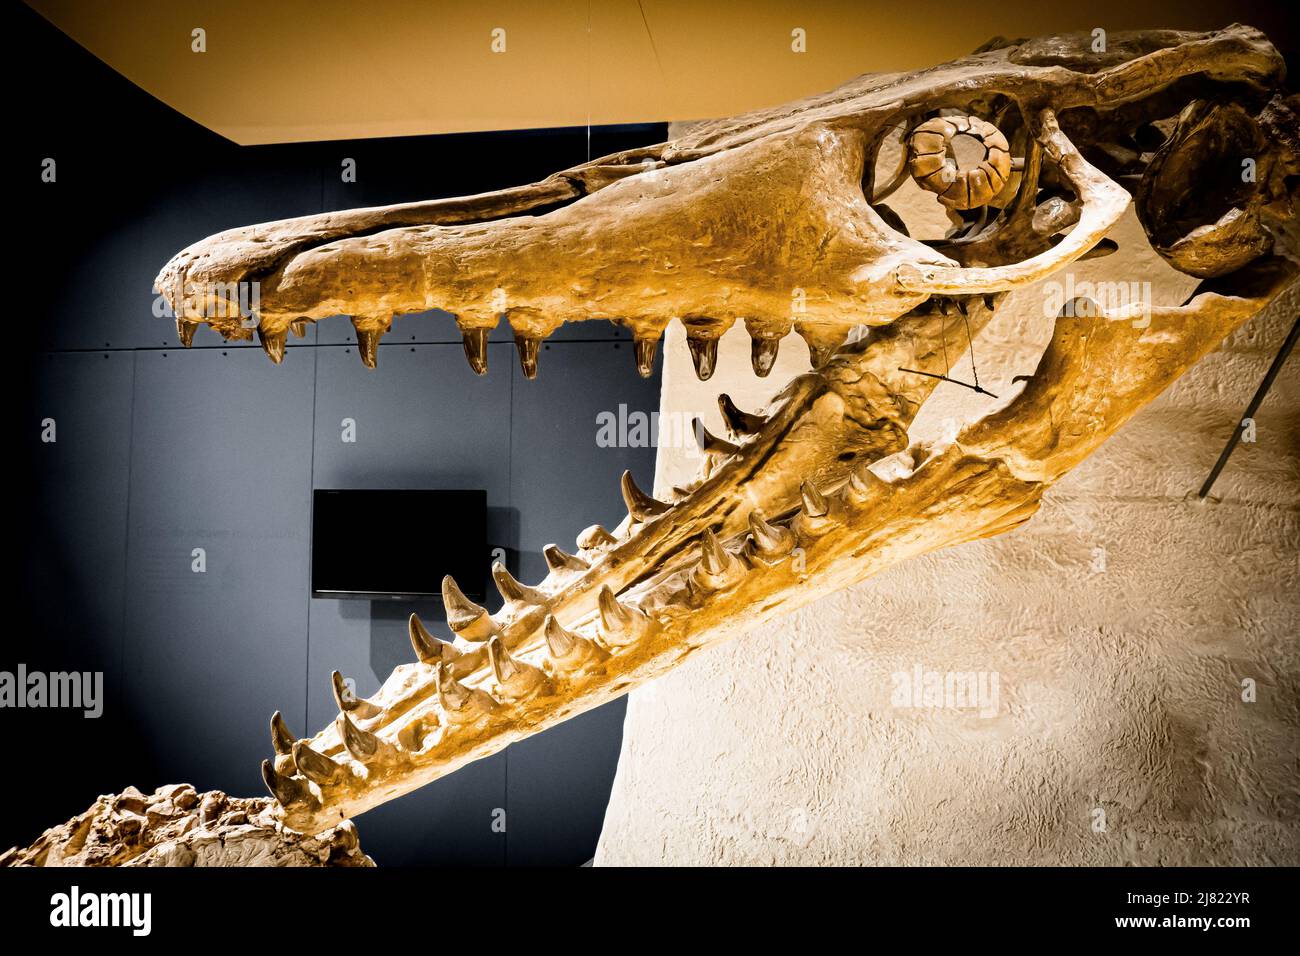 View of the huge skull and open jaws with large teeth of a Mosasaurus fossil at the Natural History Museum in Maastricht, the Netherlands Stock Photo